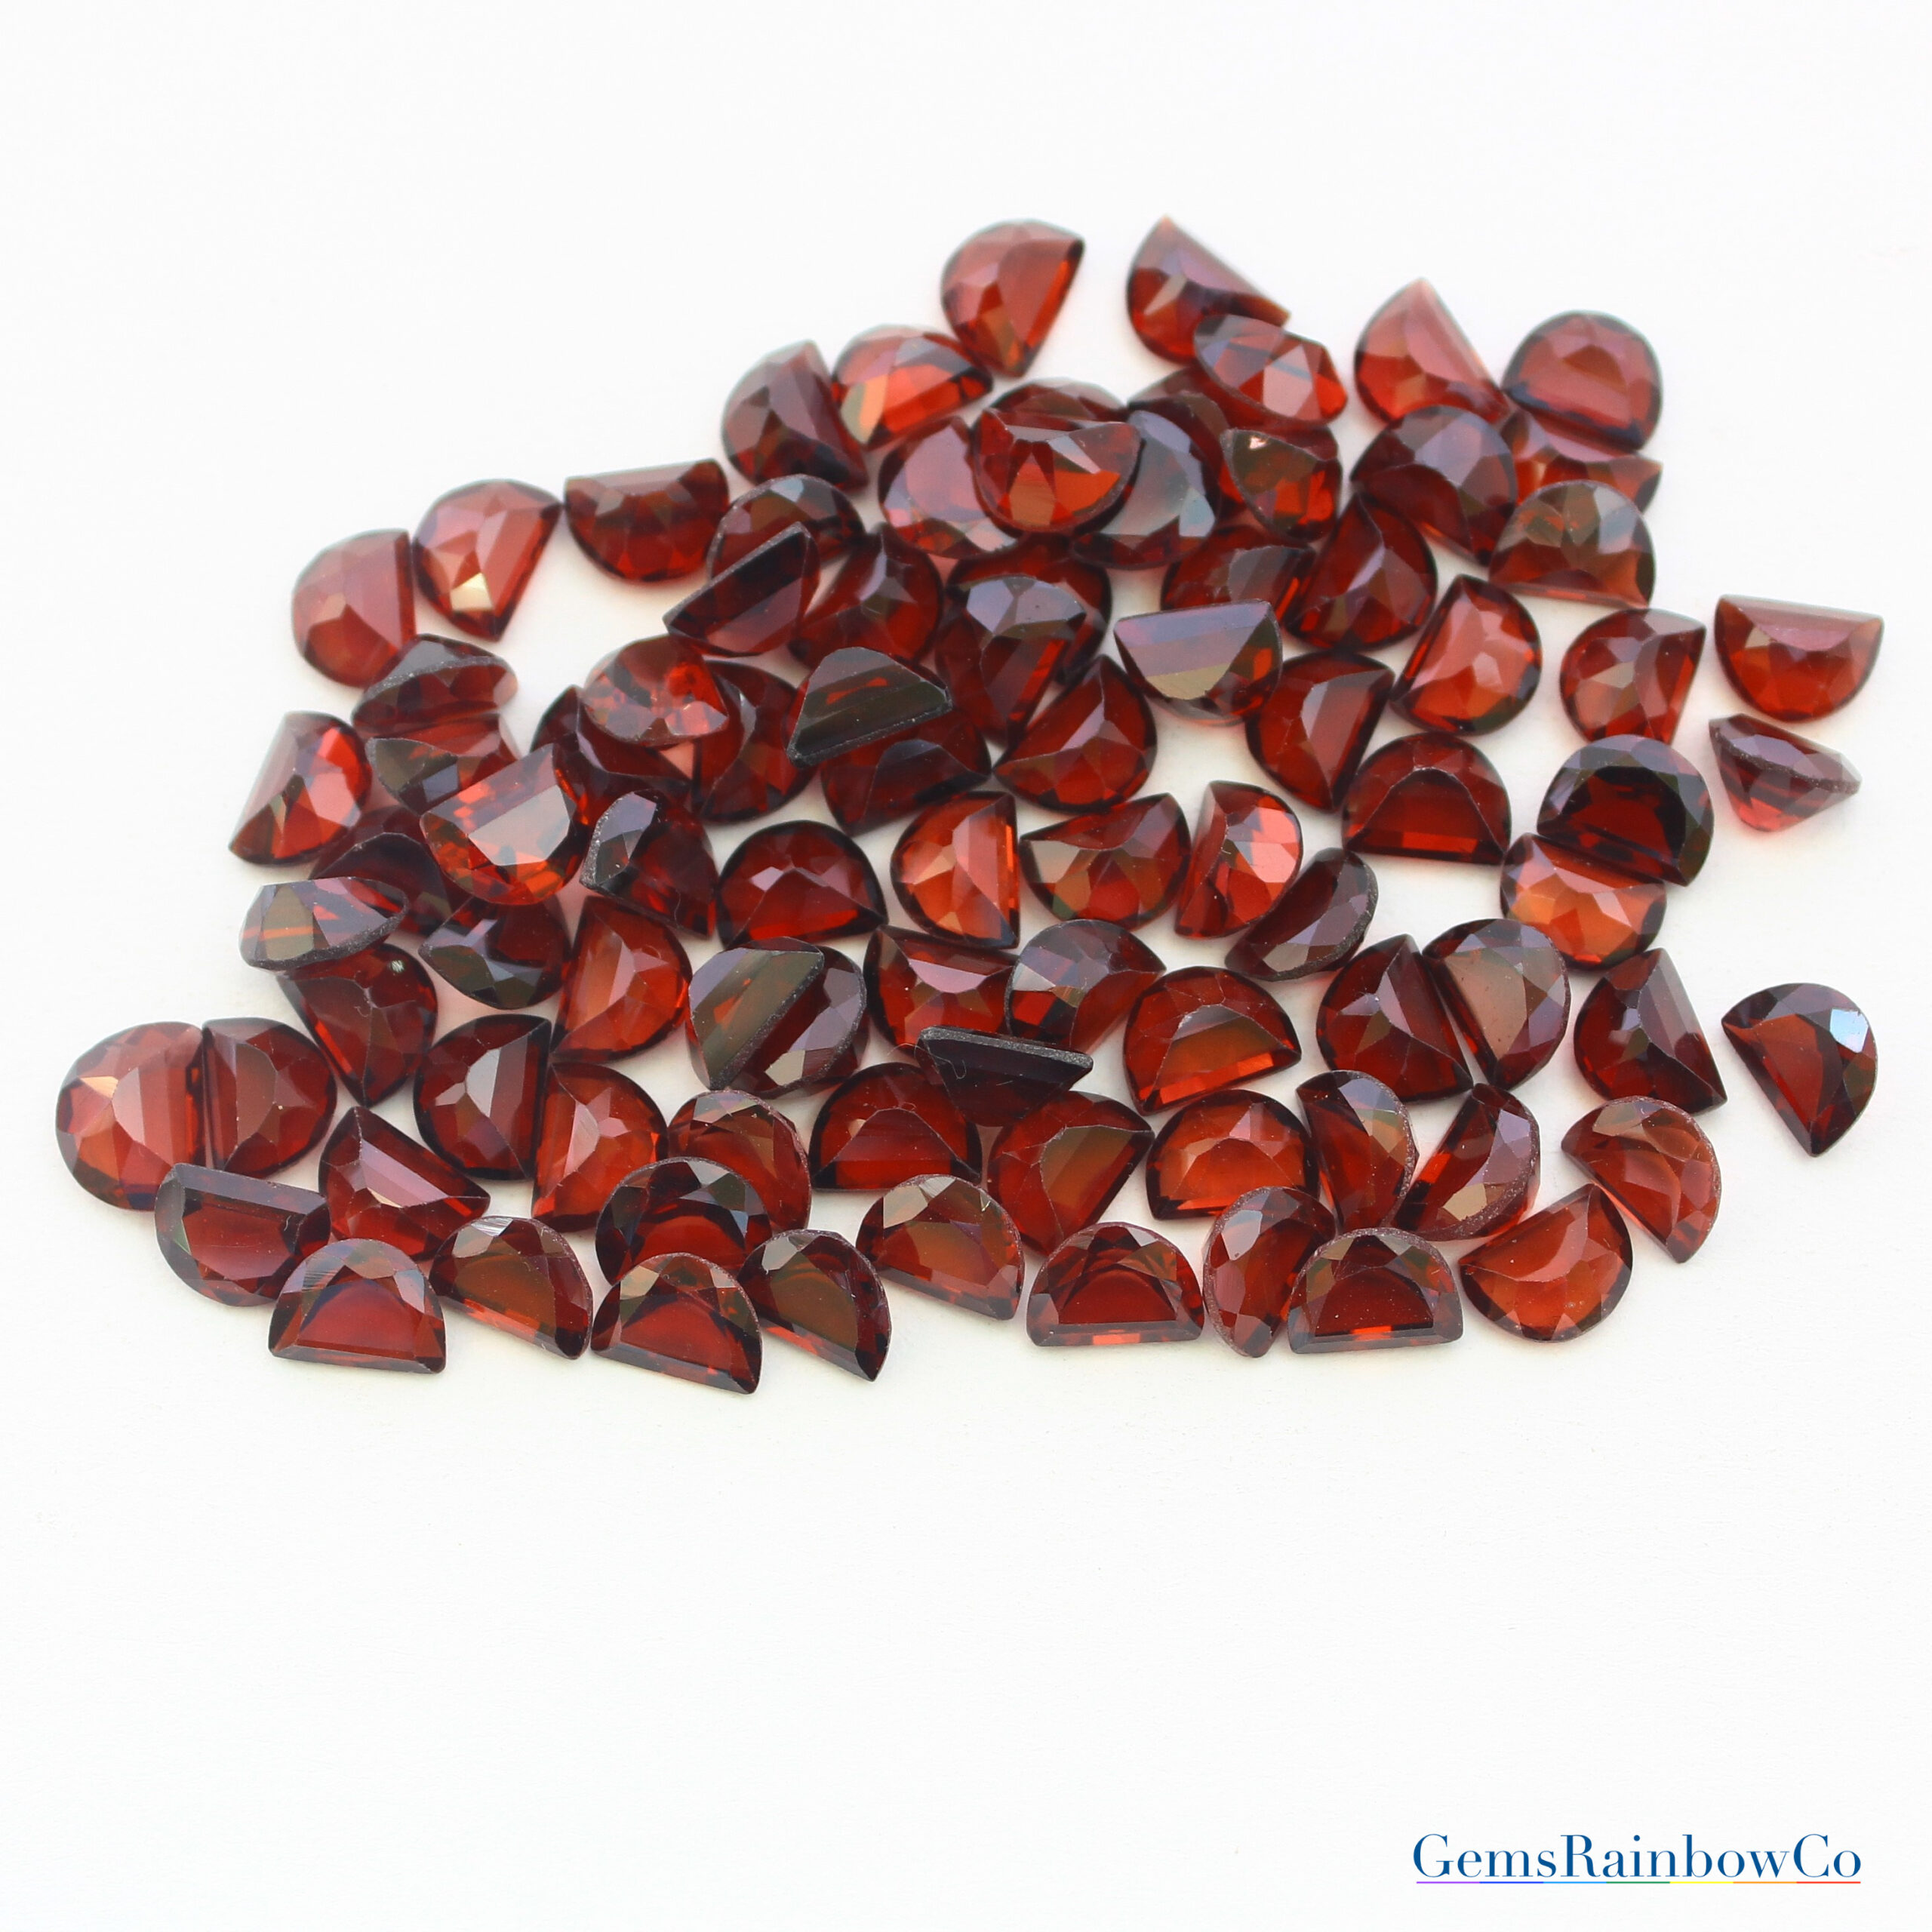 2 Pcs Matched Pair Very Beautiful Red Garnet Quartz Faceted Long Pear  Shaped Loose Gemstone Size 45X12 MM 